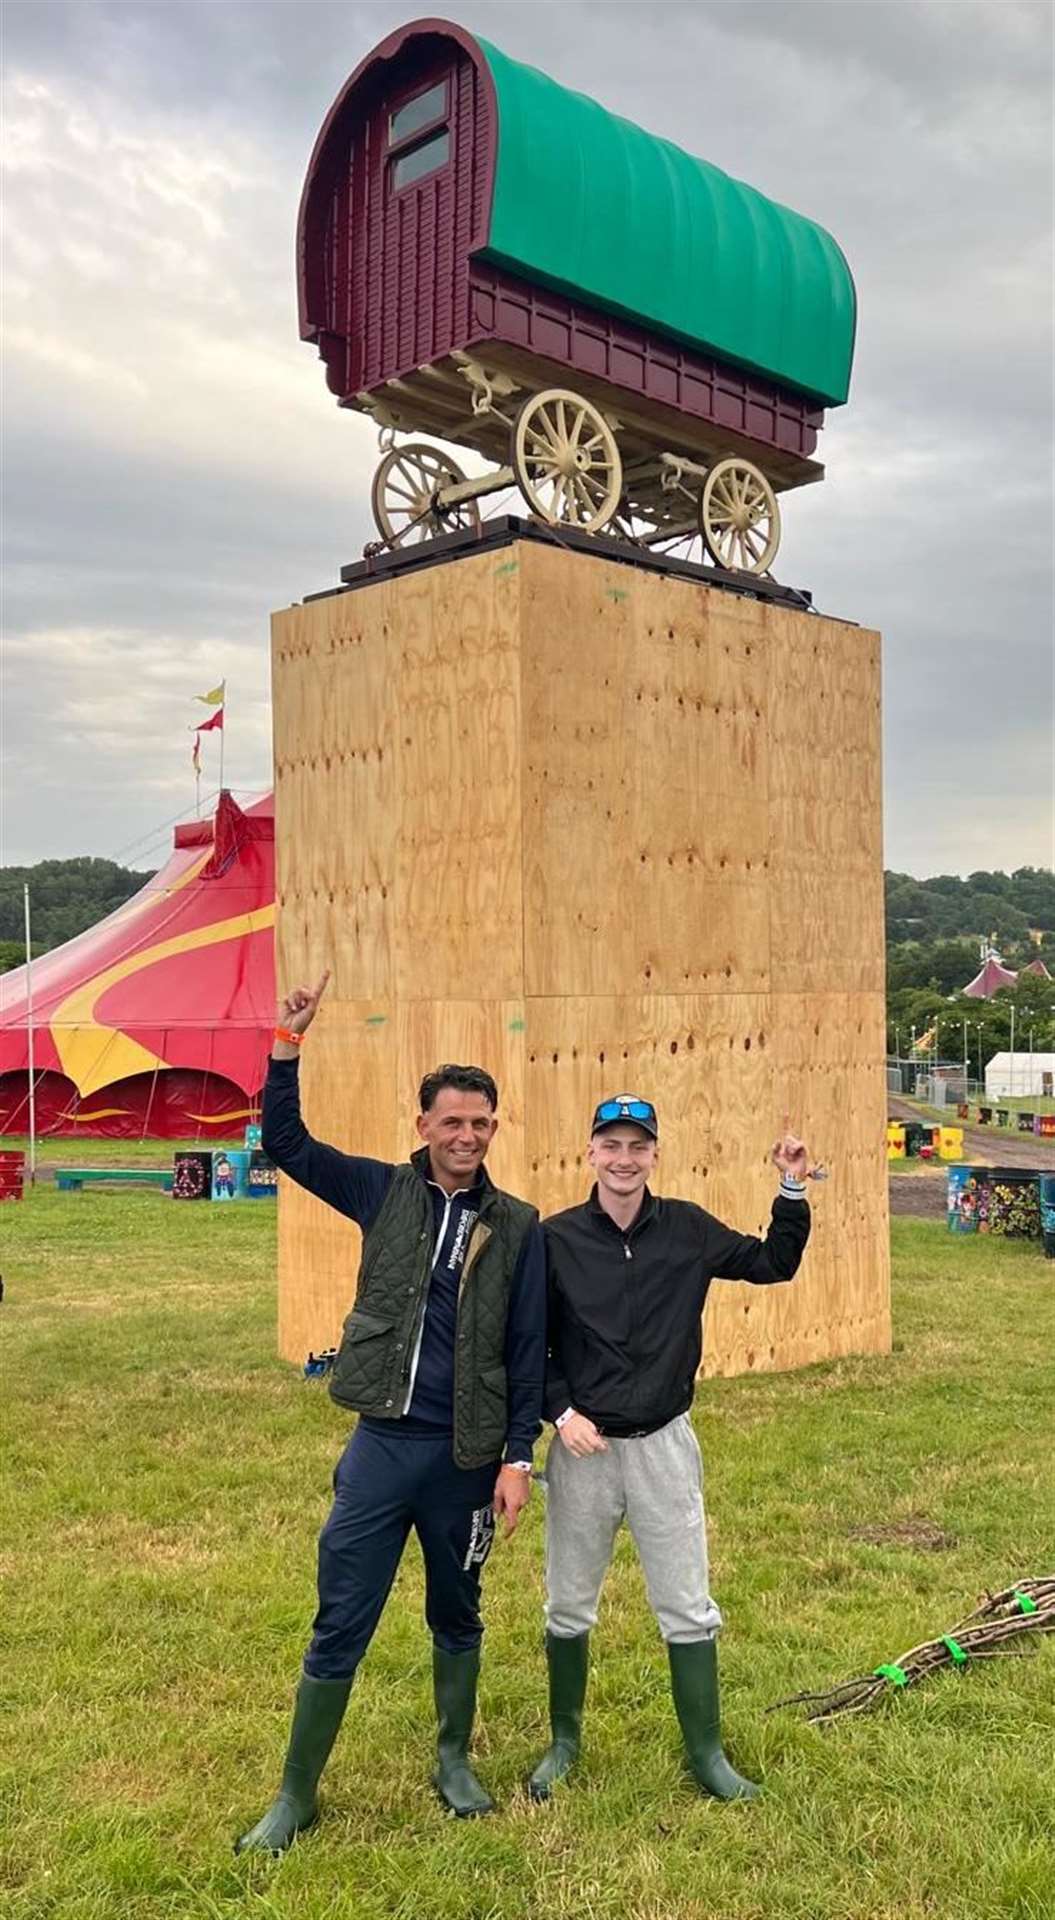 Martin Ward, left, is set to speak on several stages at Glastonbury festival over the impact of the new Policing Act on Travellers. Photo: Martin Ward